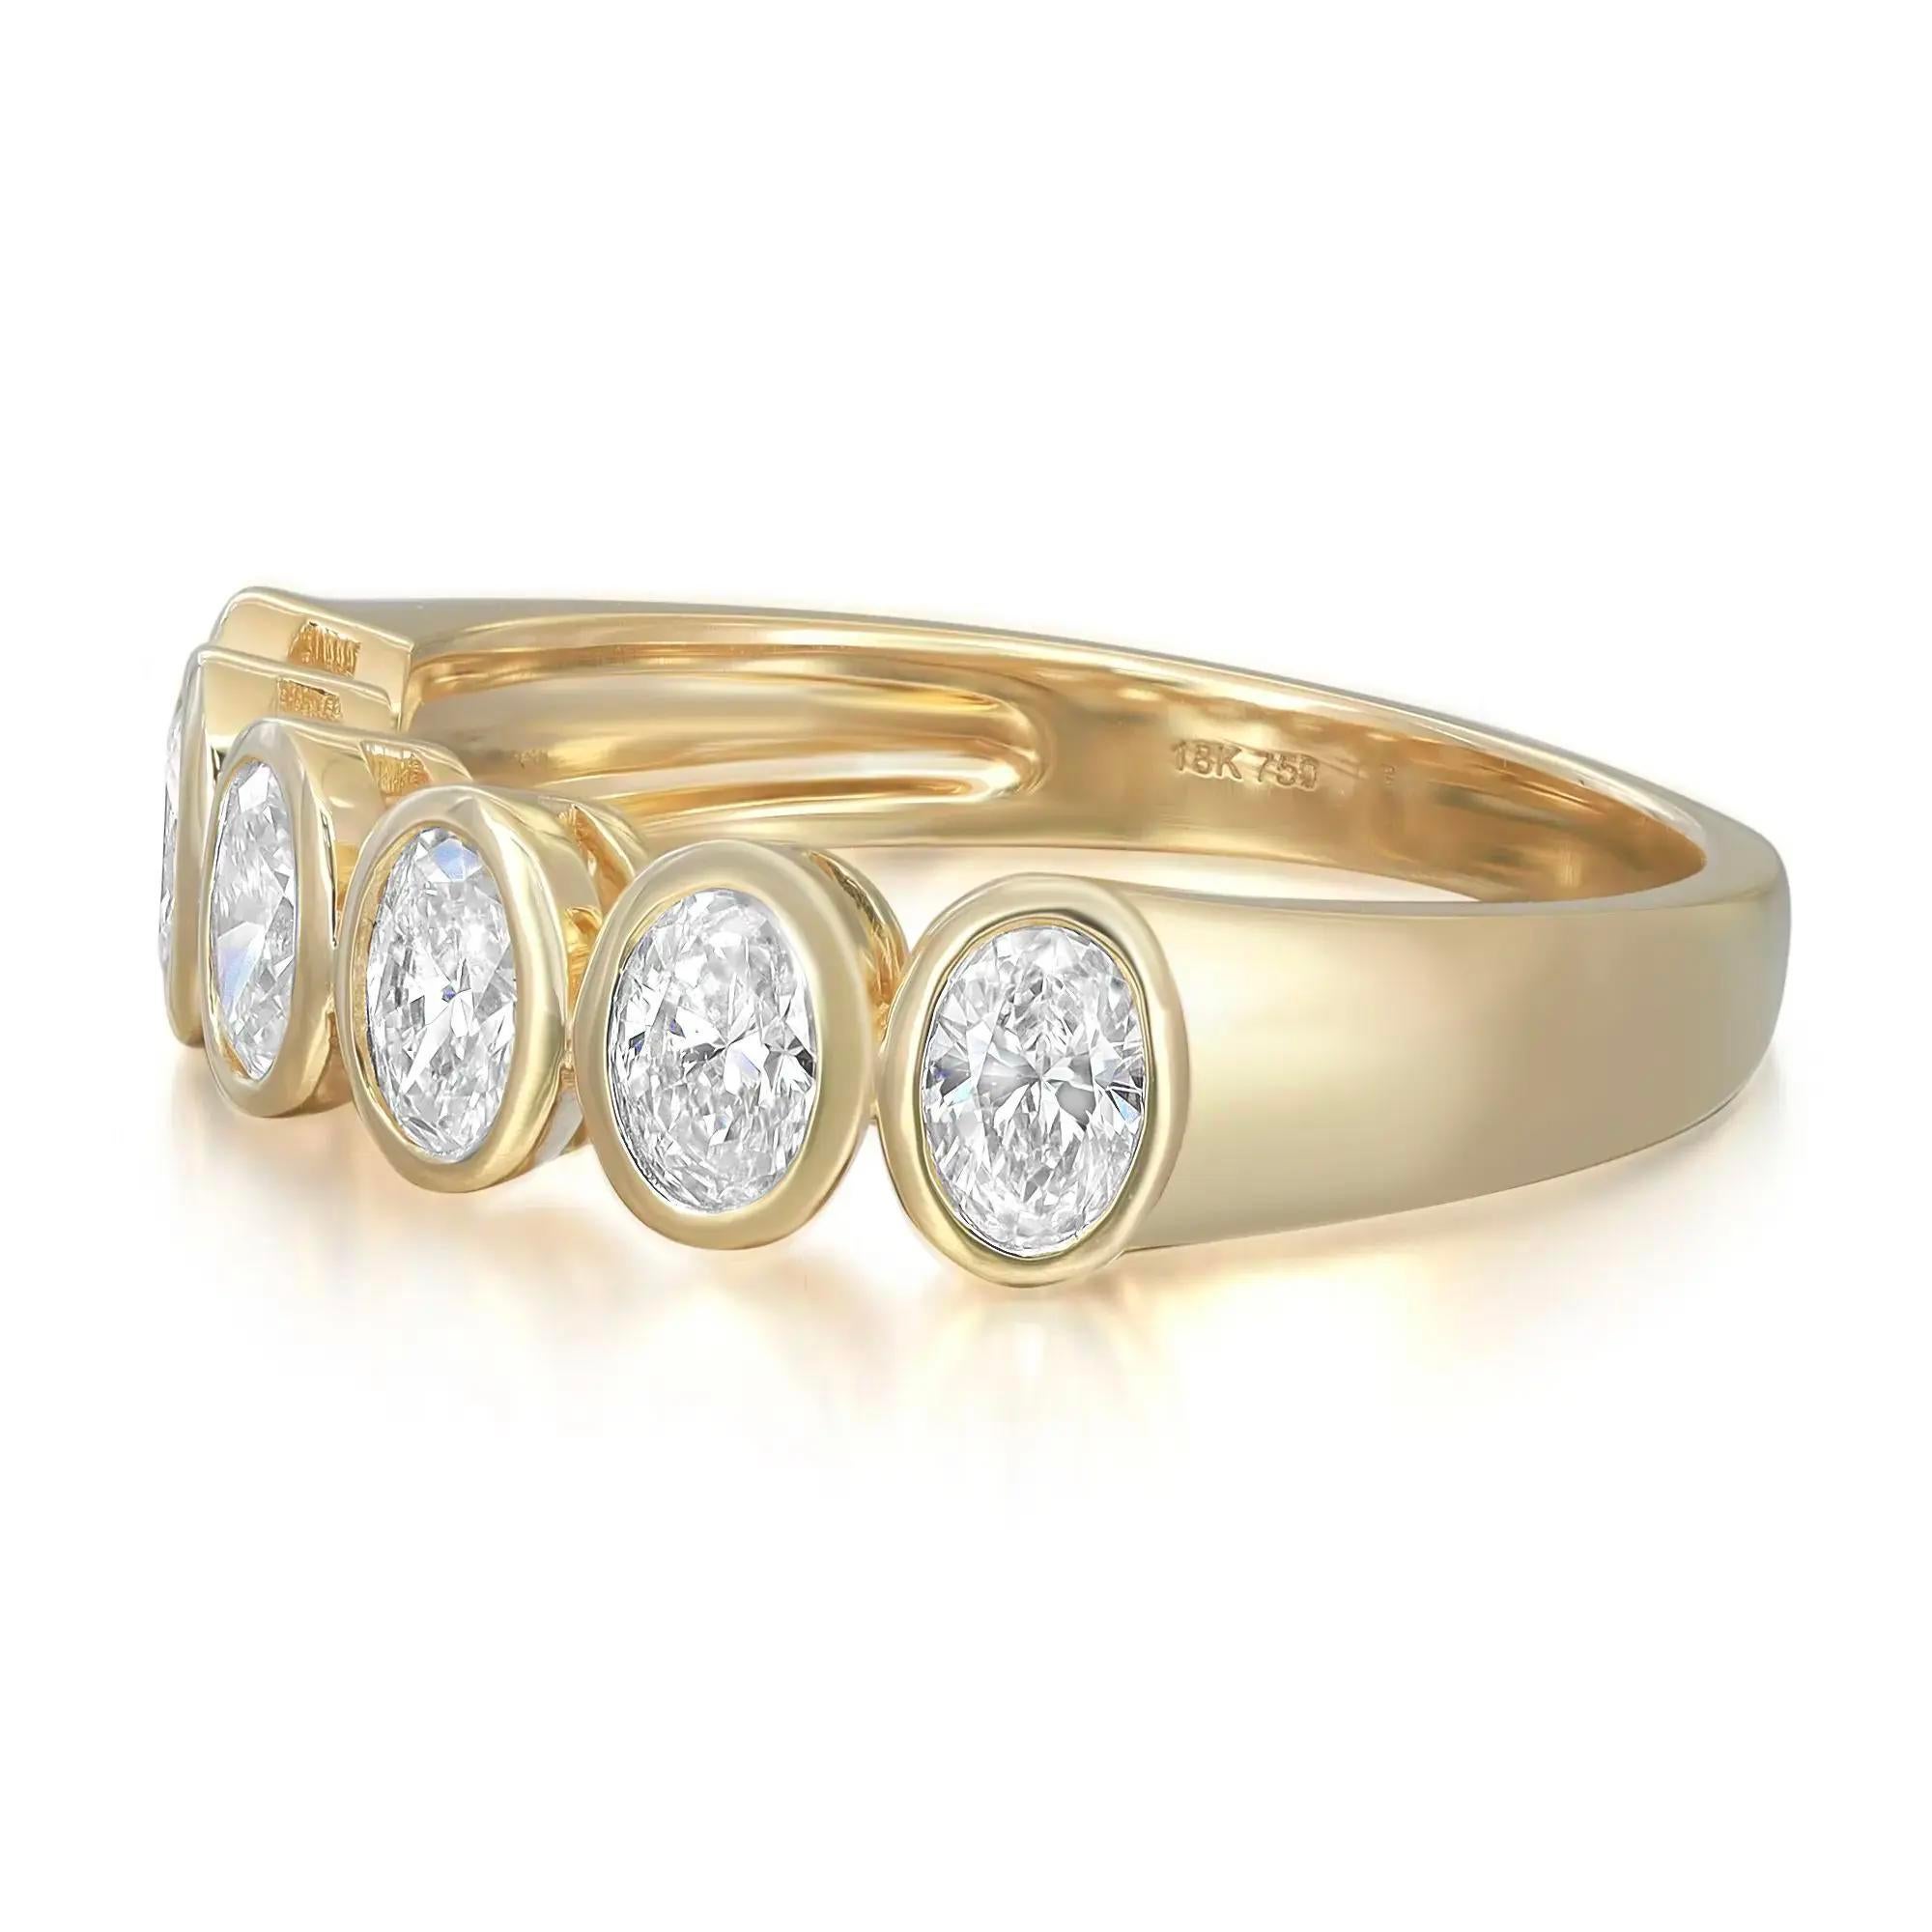 Celebrate everlasting love with this enchanting eternity band ring. Crafted in high polished 18K yellow gold. Showcasing 6 bezel set oval cut dazzling diamonds weighing 0.86 carat. Diamond quality: color G-H and clarity VS-SI. Ring size: 6.5. Width: